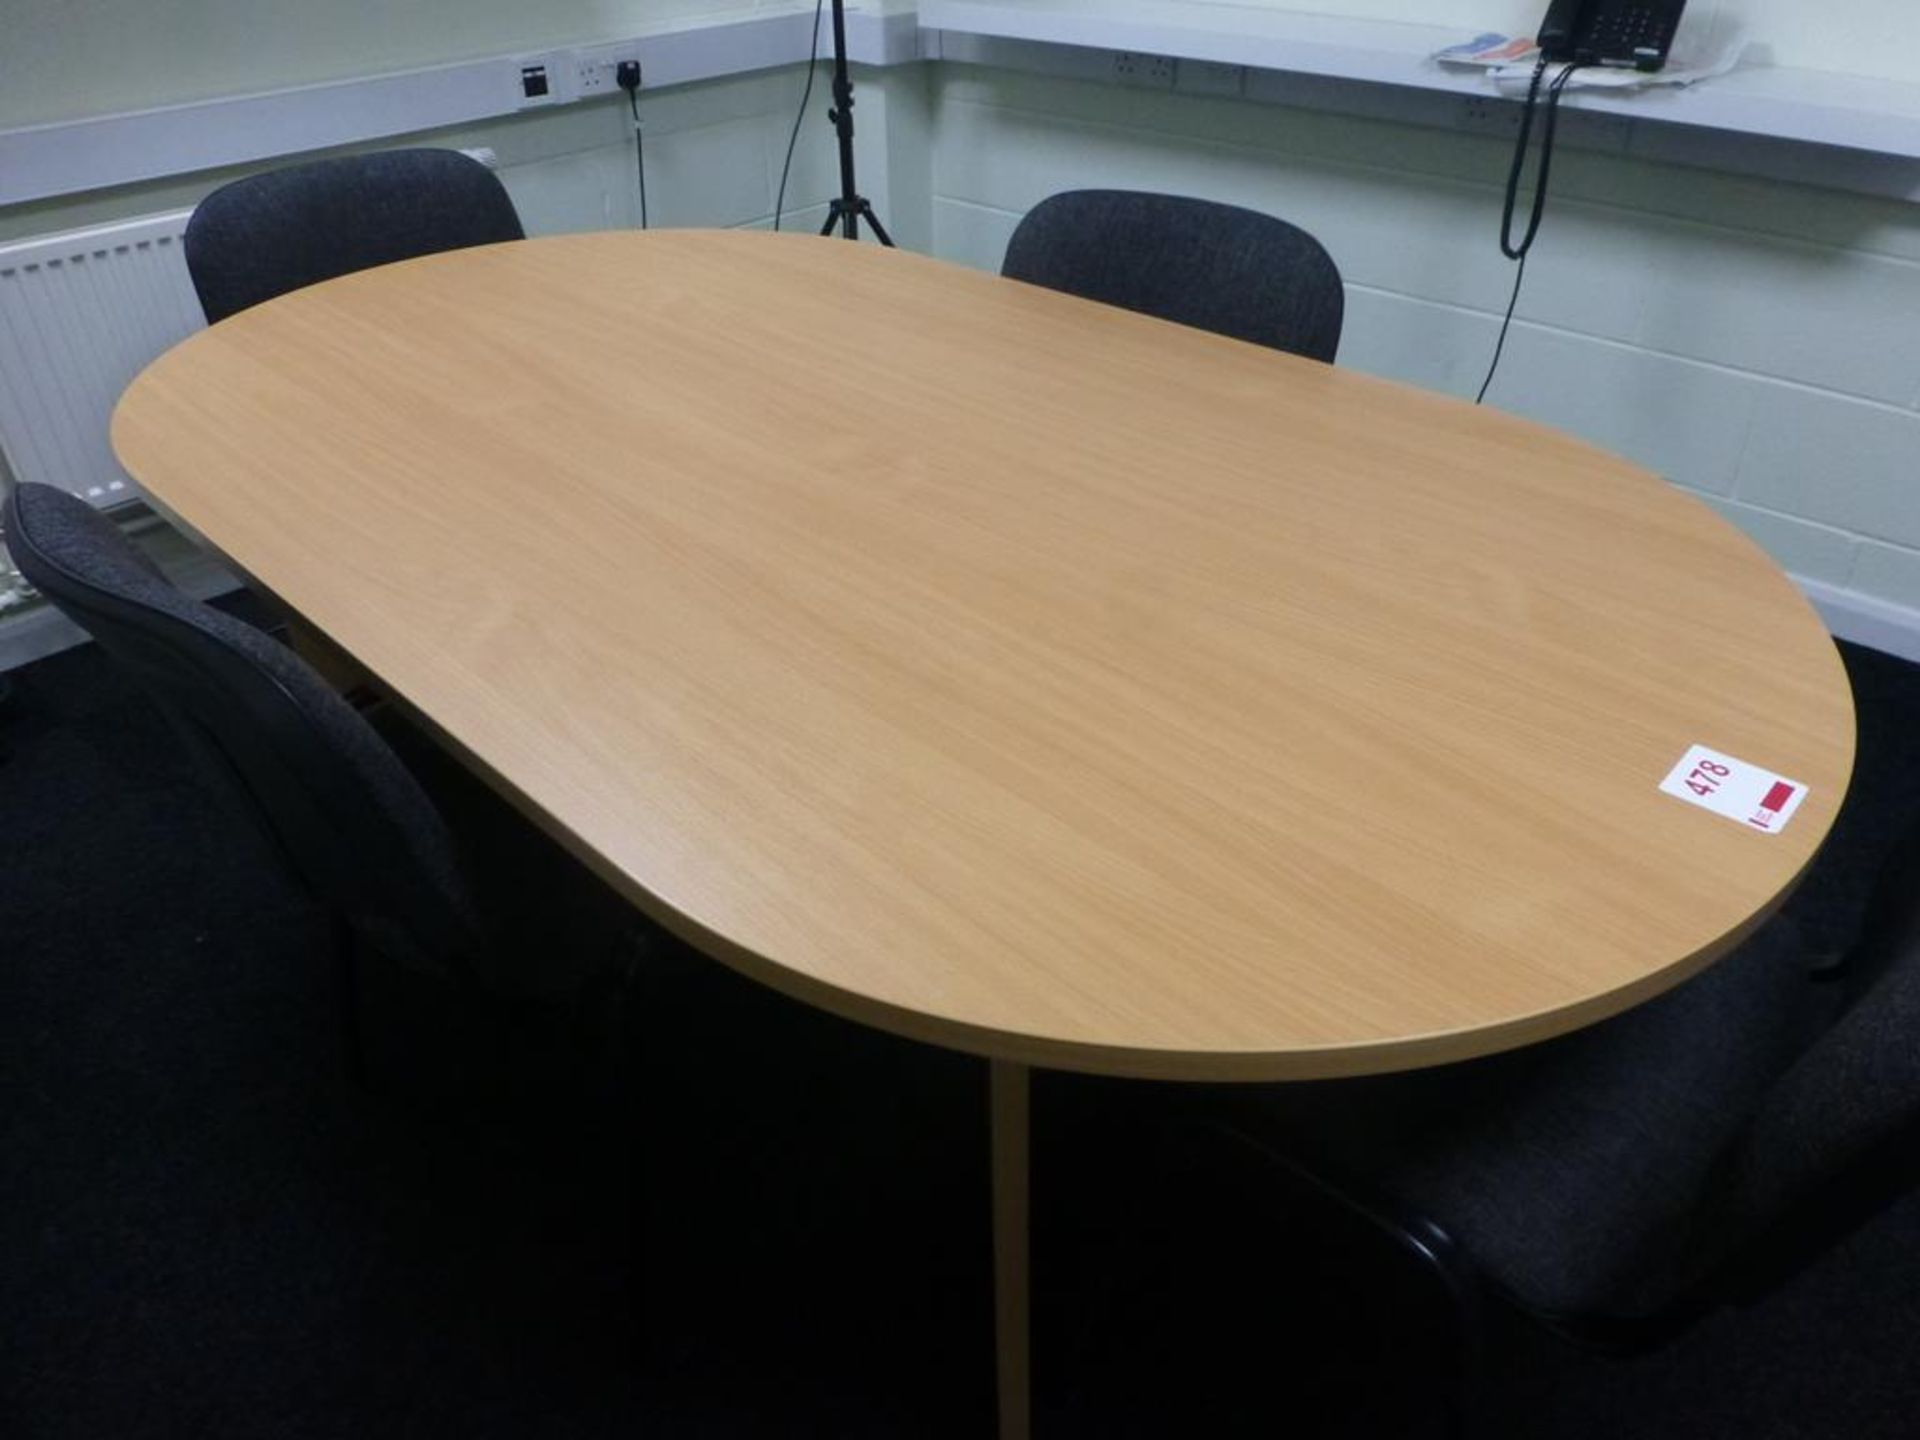 Cherry effect 1800mm x 1000mm oval meeting table with 4 black fabric upholstered side chairs - Image 2 of 2